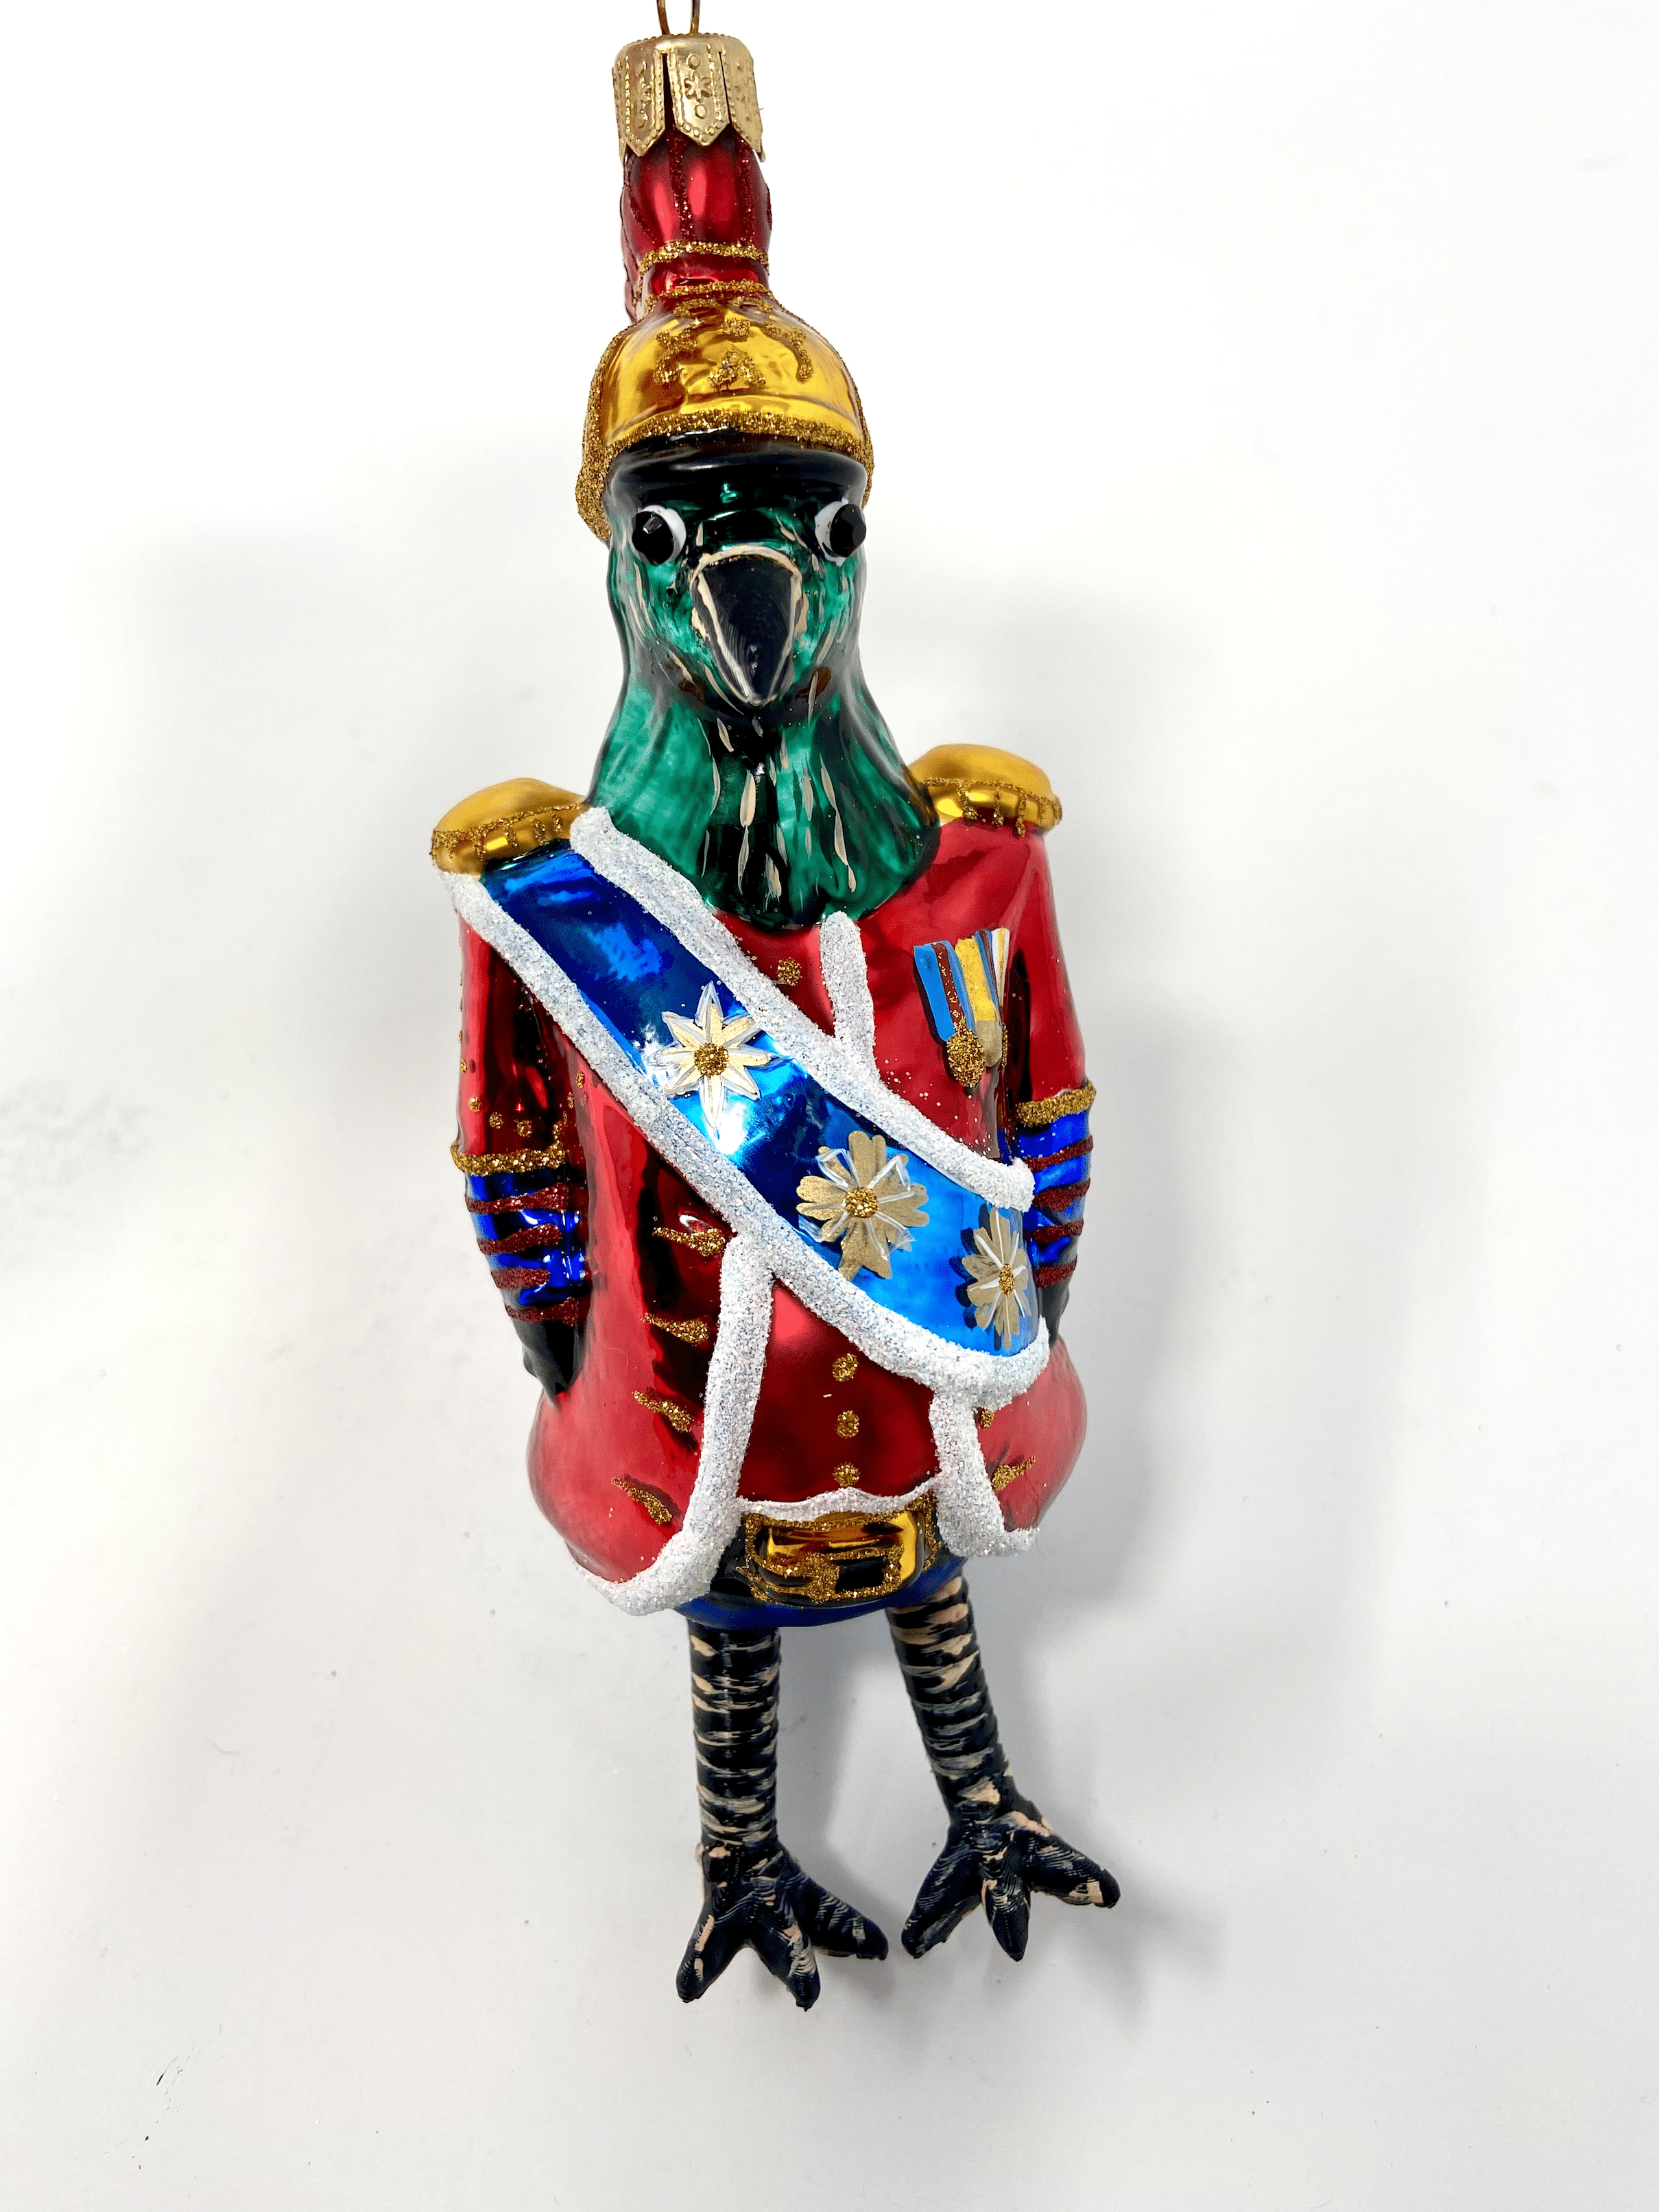 Blue bird dressed in a Buckingham Palace royal outfit with a blue sash and red coat. Polish glass christmas ornaments in saturated colors.